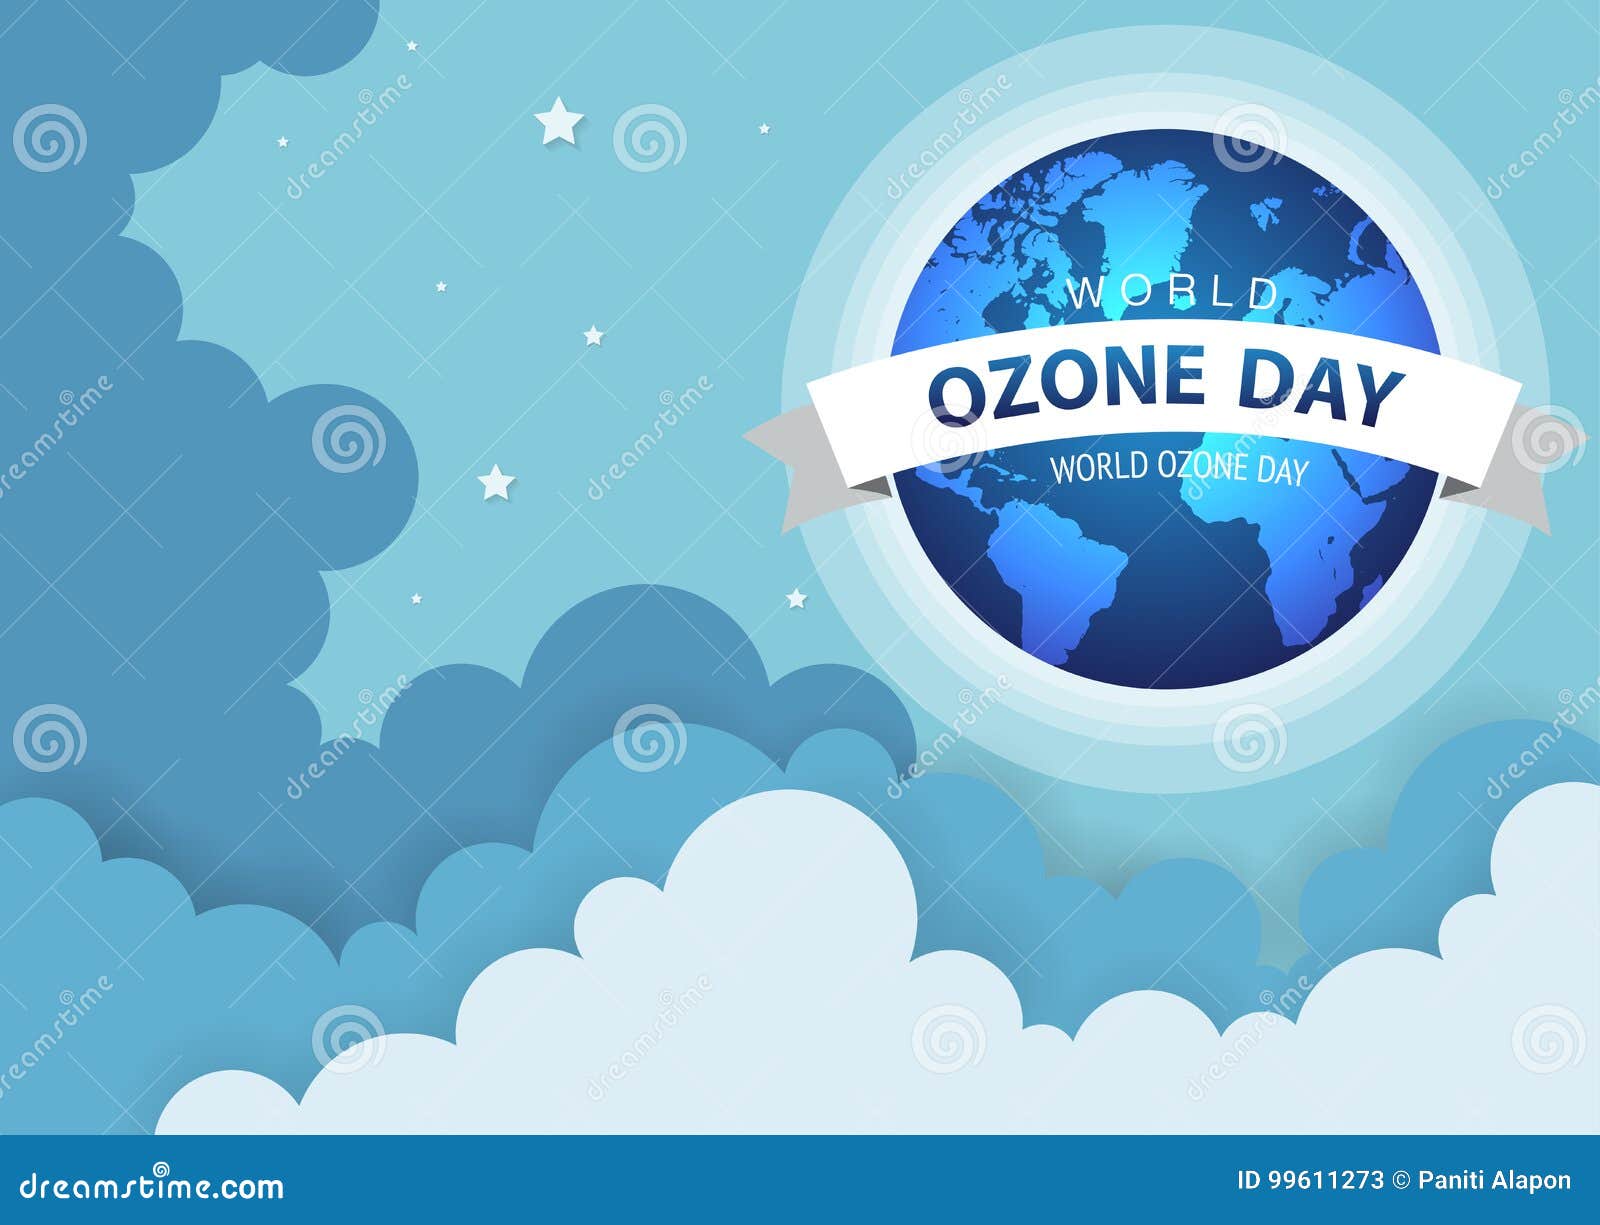 World Or International Ozone Day Vector Design For Poster ...